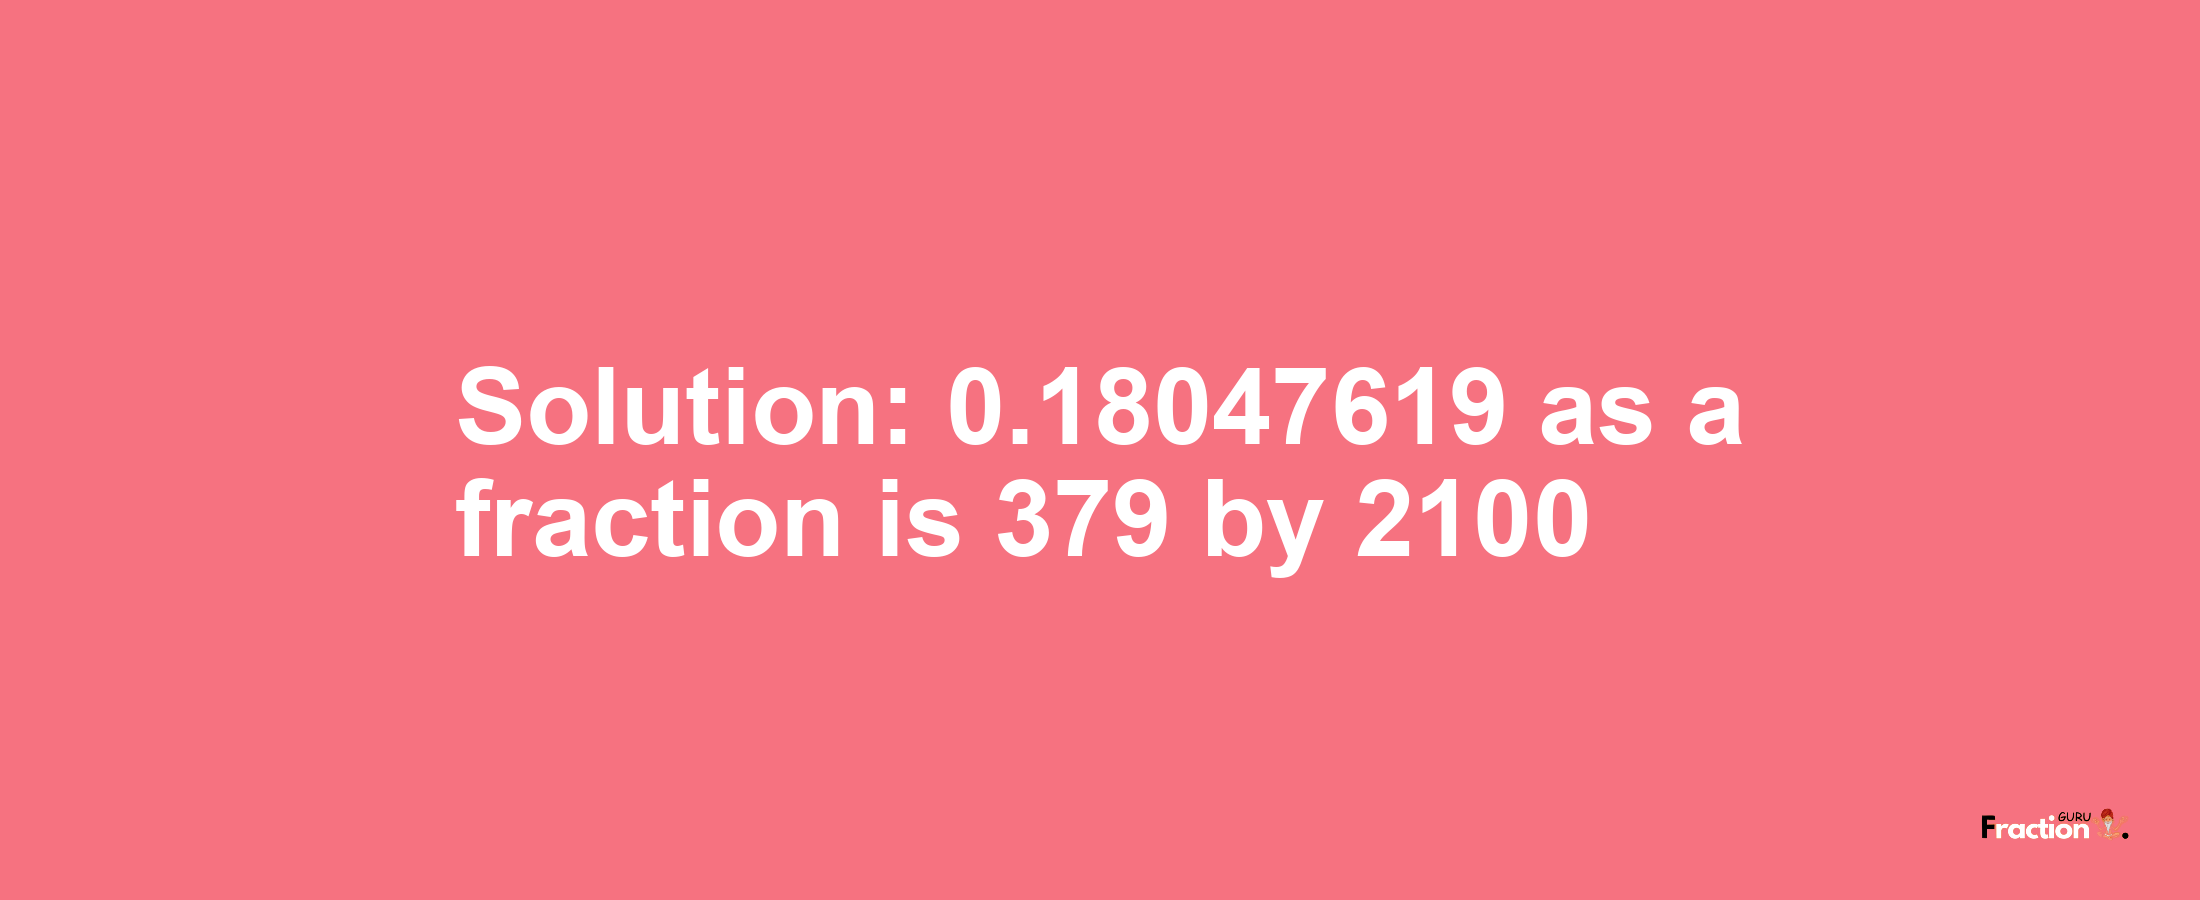 Solution:0.18047619 as a fraction is 379/2100